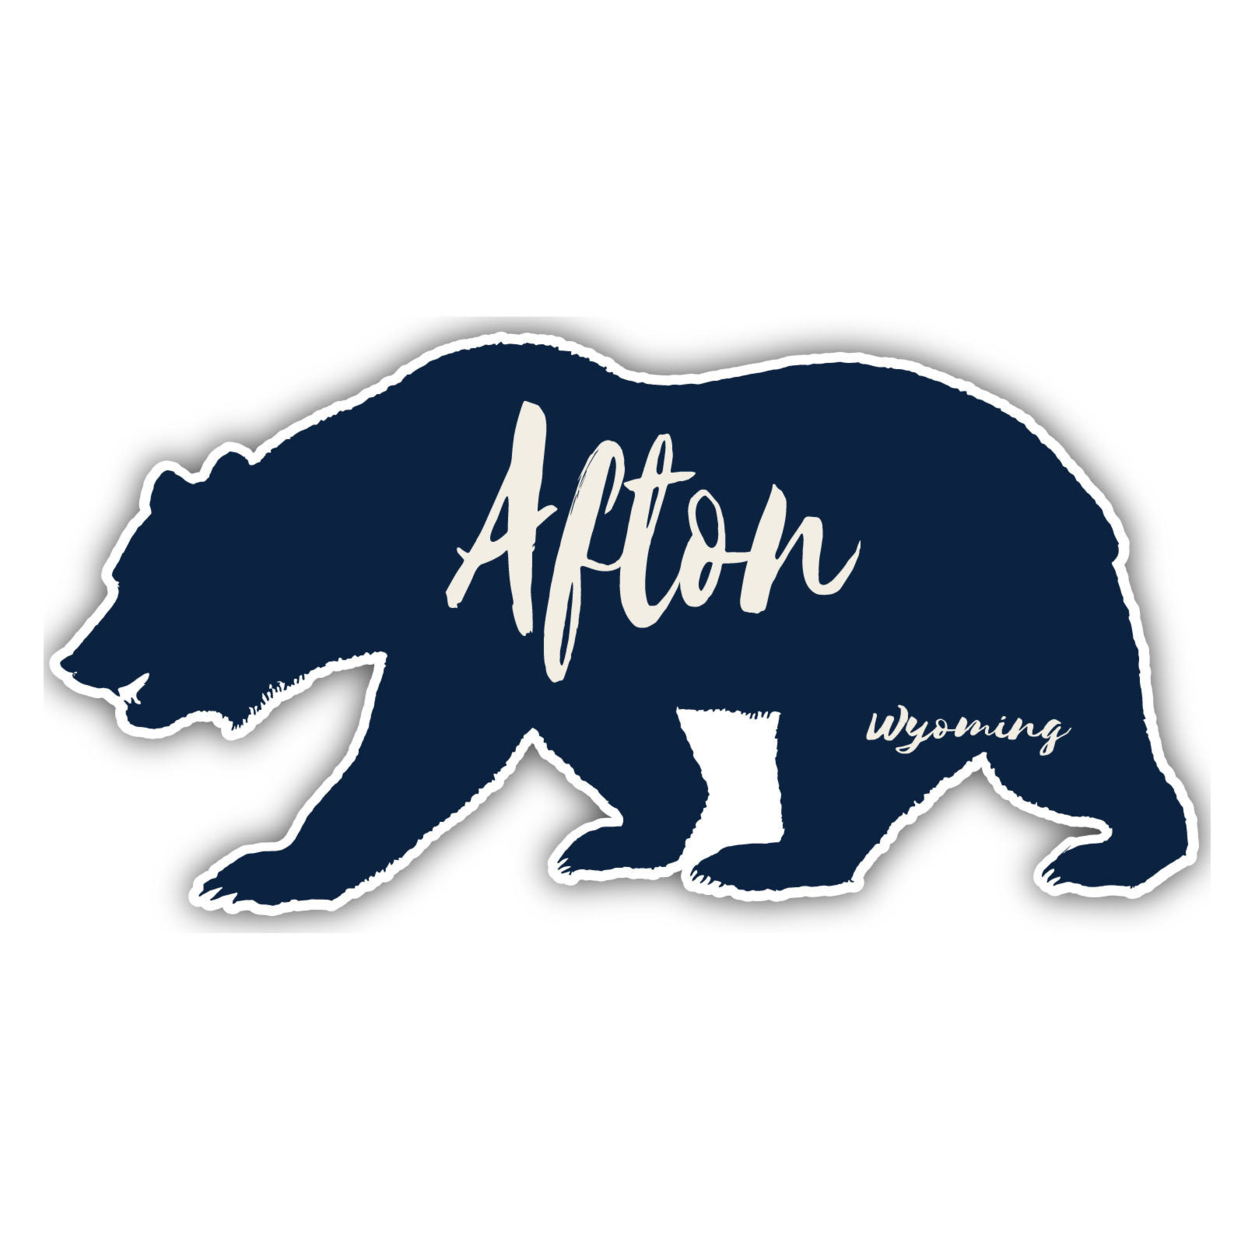 Afton Wyoming Souvenir Decorative Stickers (Choose Theme And Size) - Single Unit, 2-Inch, Bear